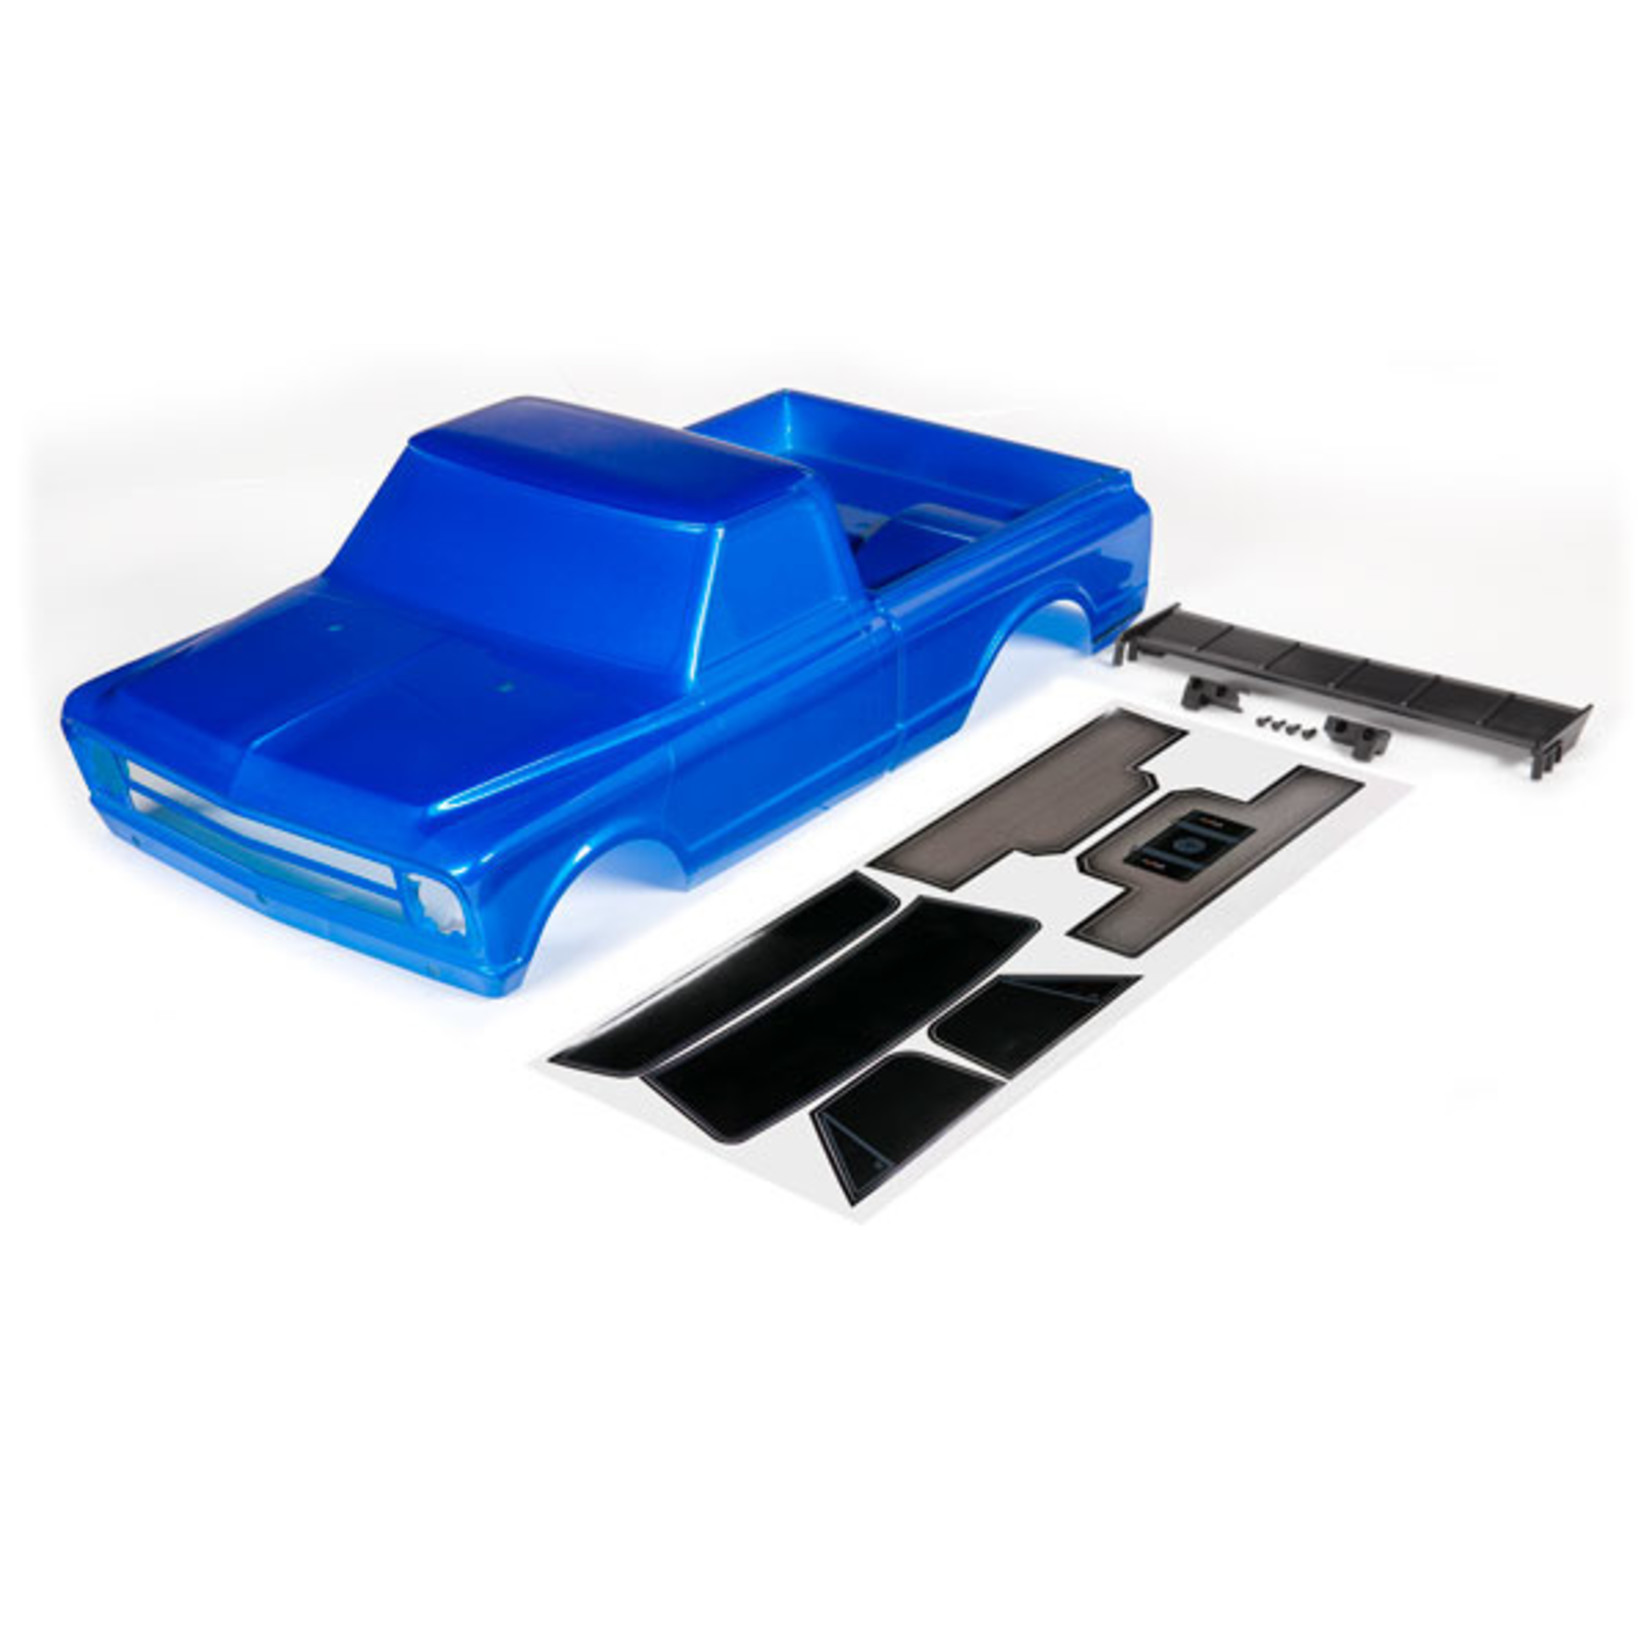 Traxxas 9411X - Body, Chevrolet C10, blue (painted) (includes w